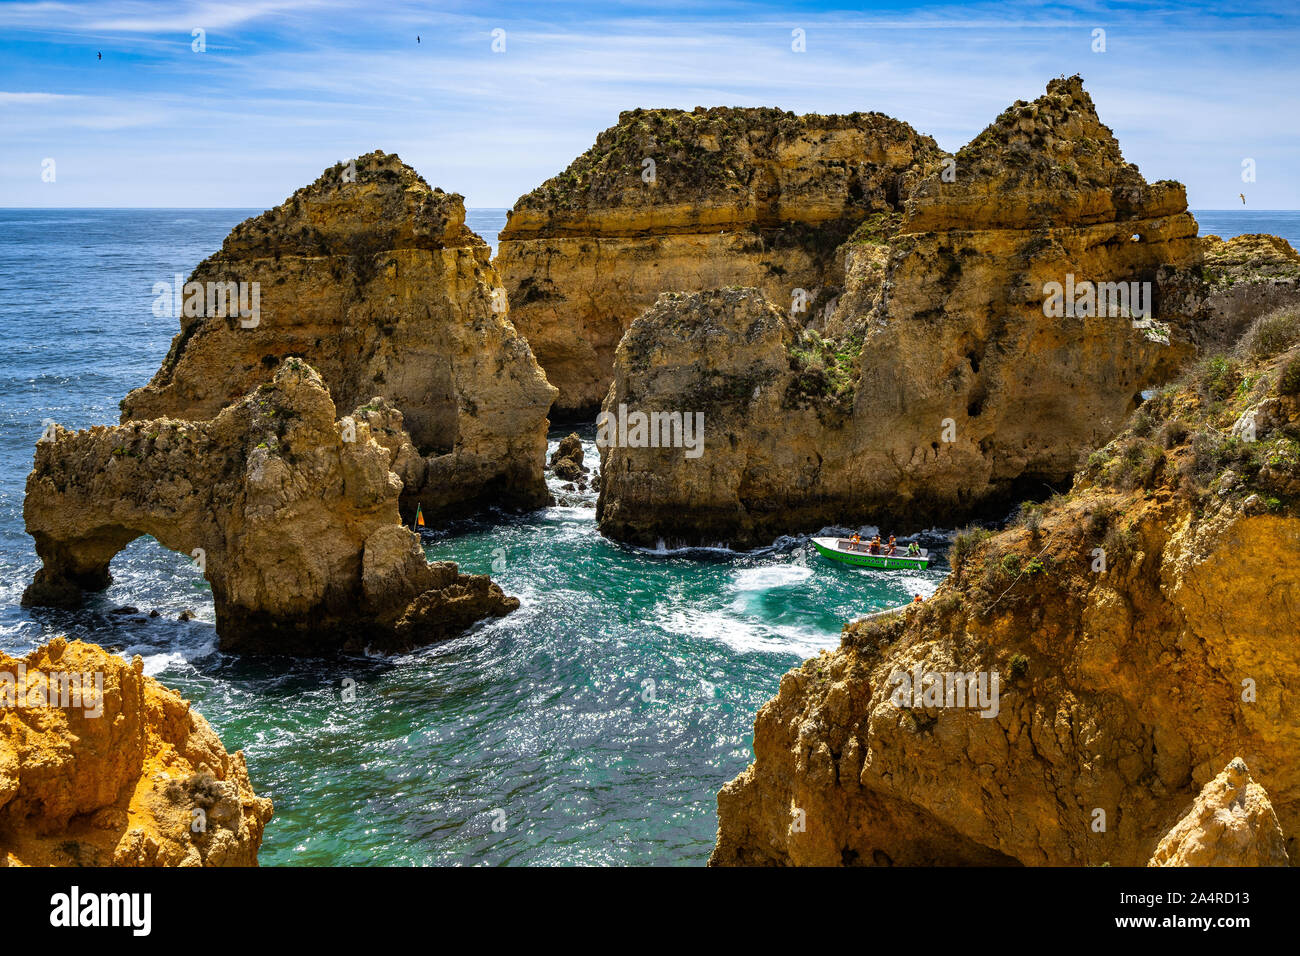 The cliffs of the Ponta da Piedade are one of the finest natural features of Algarve region, Portugal Stock Photo